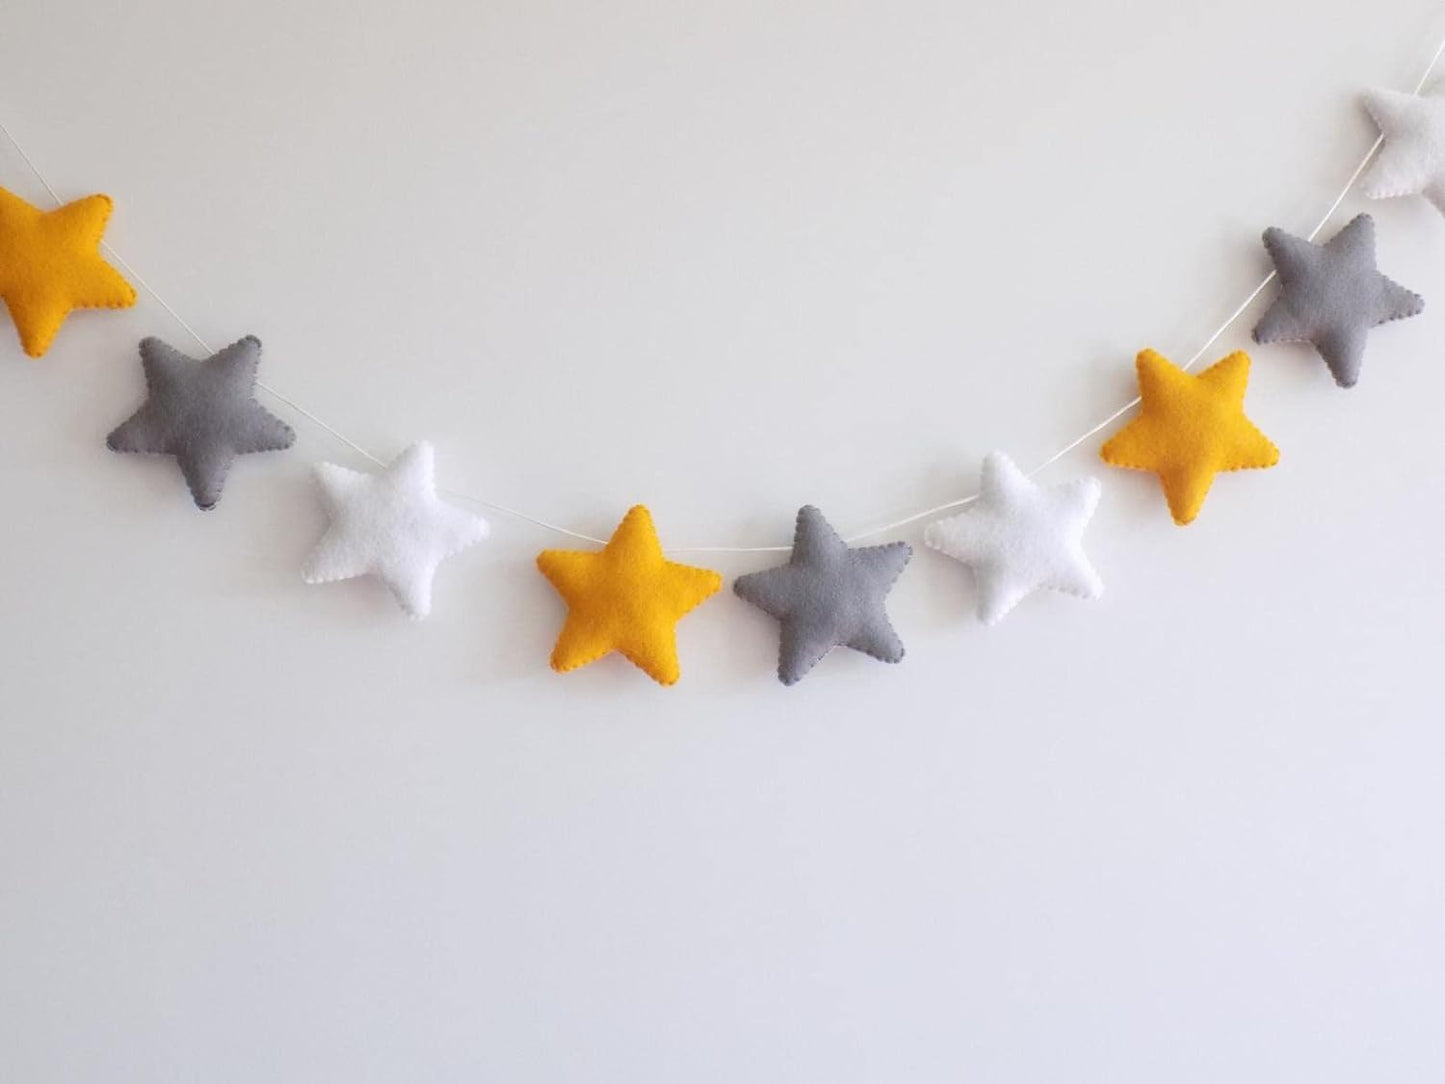 Yellow and gray felt stars garland, a charming addition to your party decorations or craft projects.